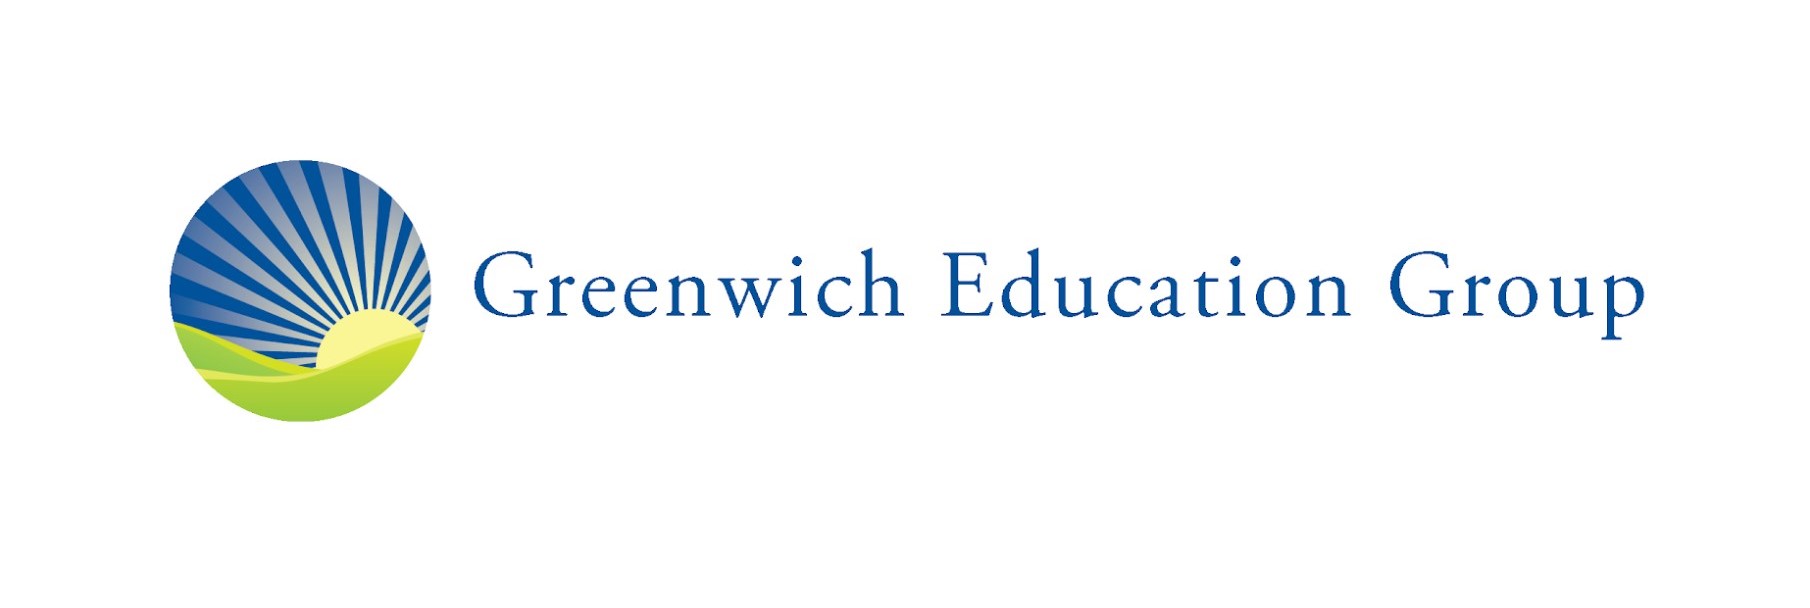 Greenwich Education Group